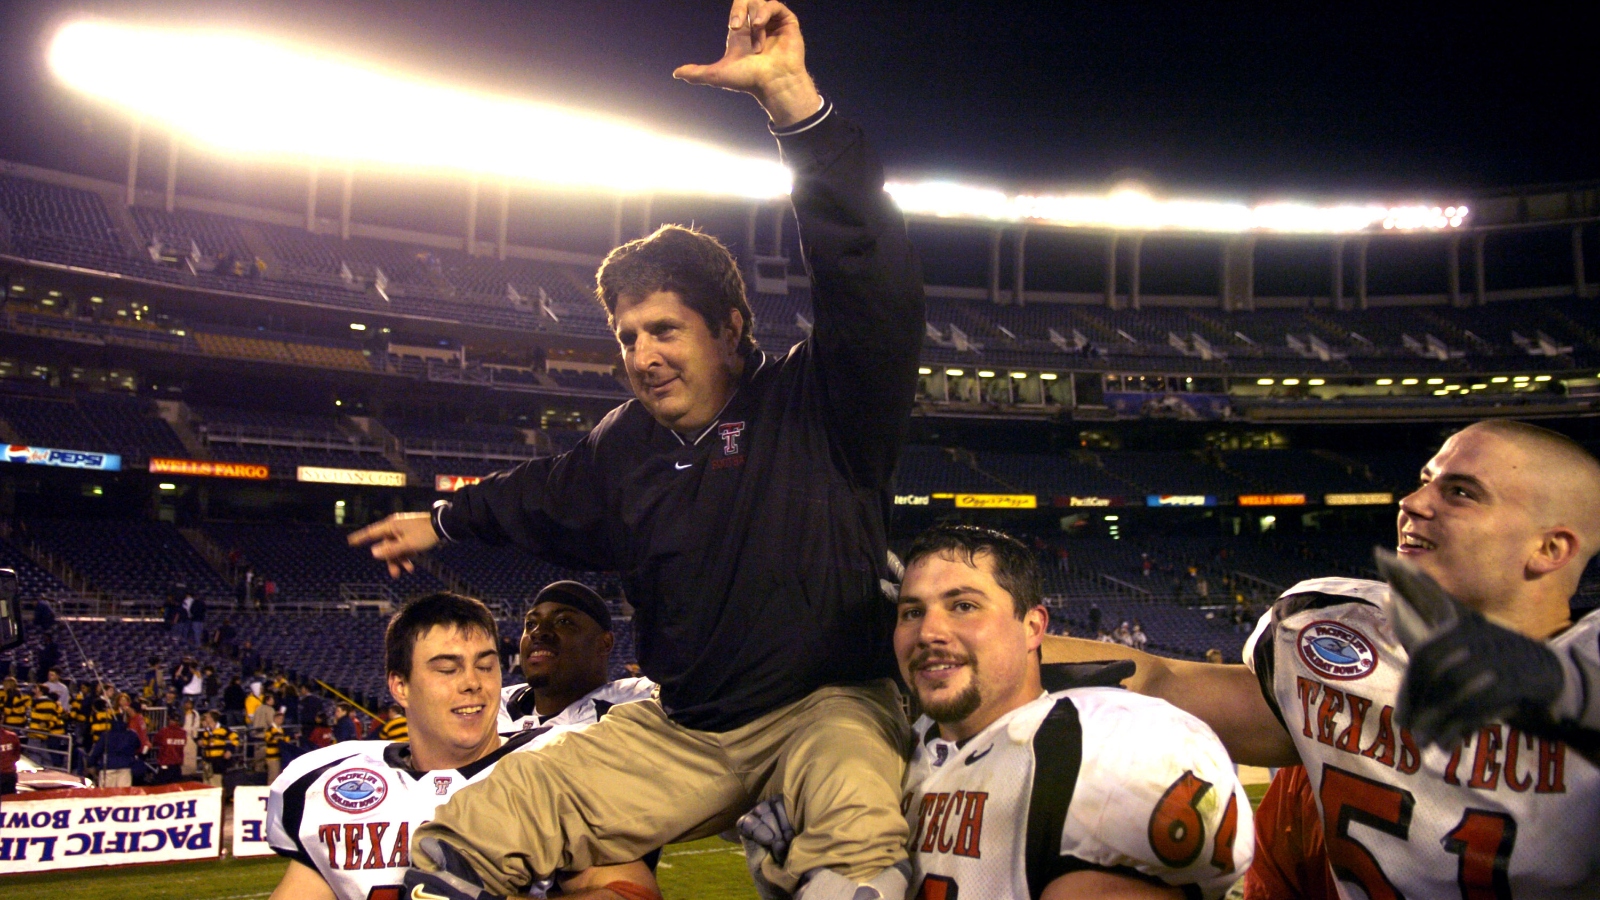 Texas Tech coach Mike Leach being carried off the field by his players